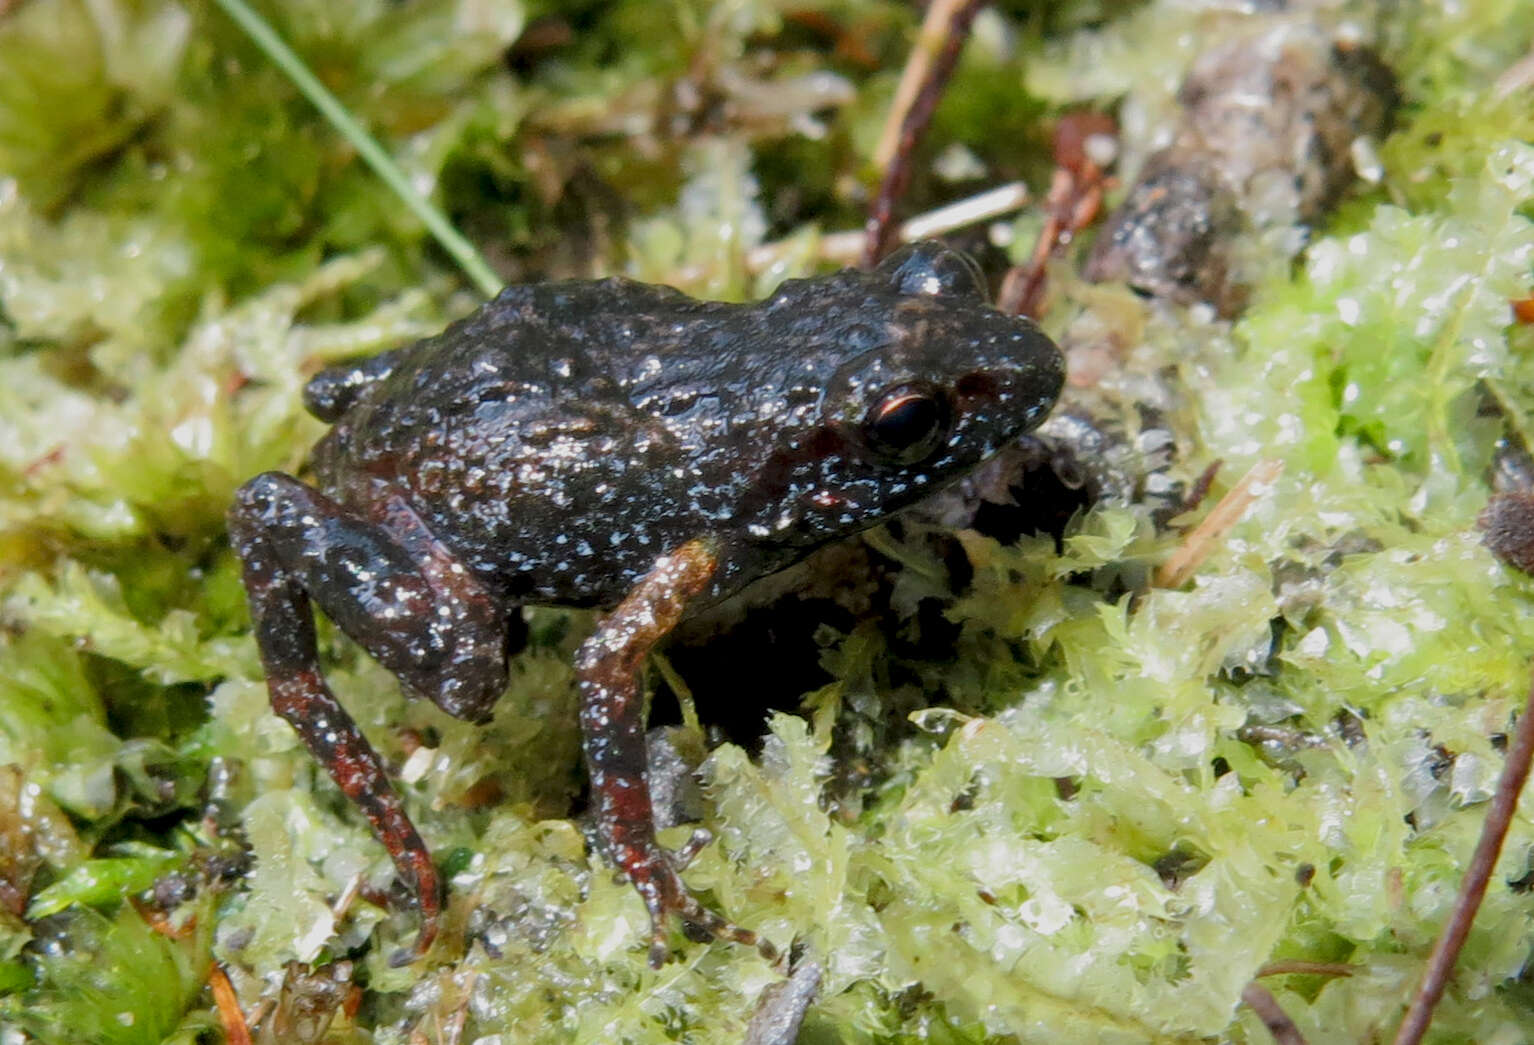 Image of Drewes' moss frog